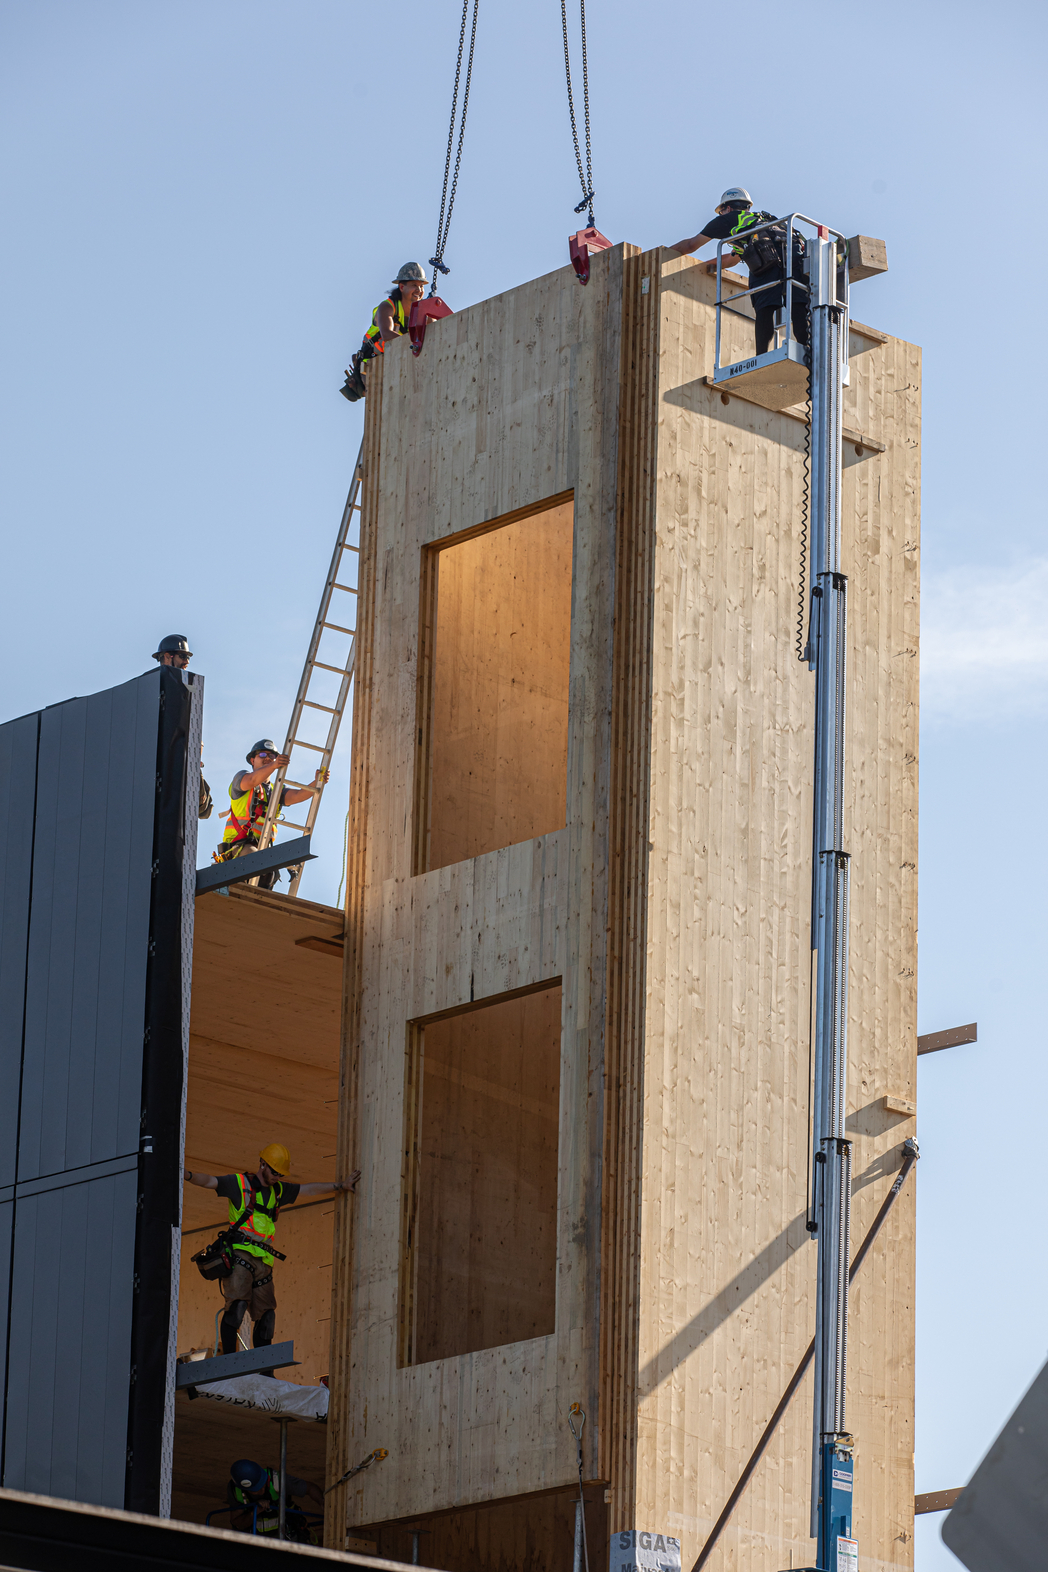 Construction workers align a prefabricated wood panel for elevator shaft while it hangs from a crane.